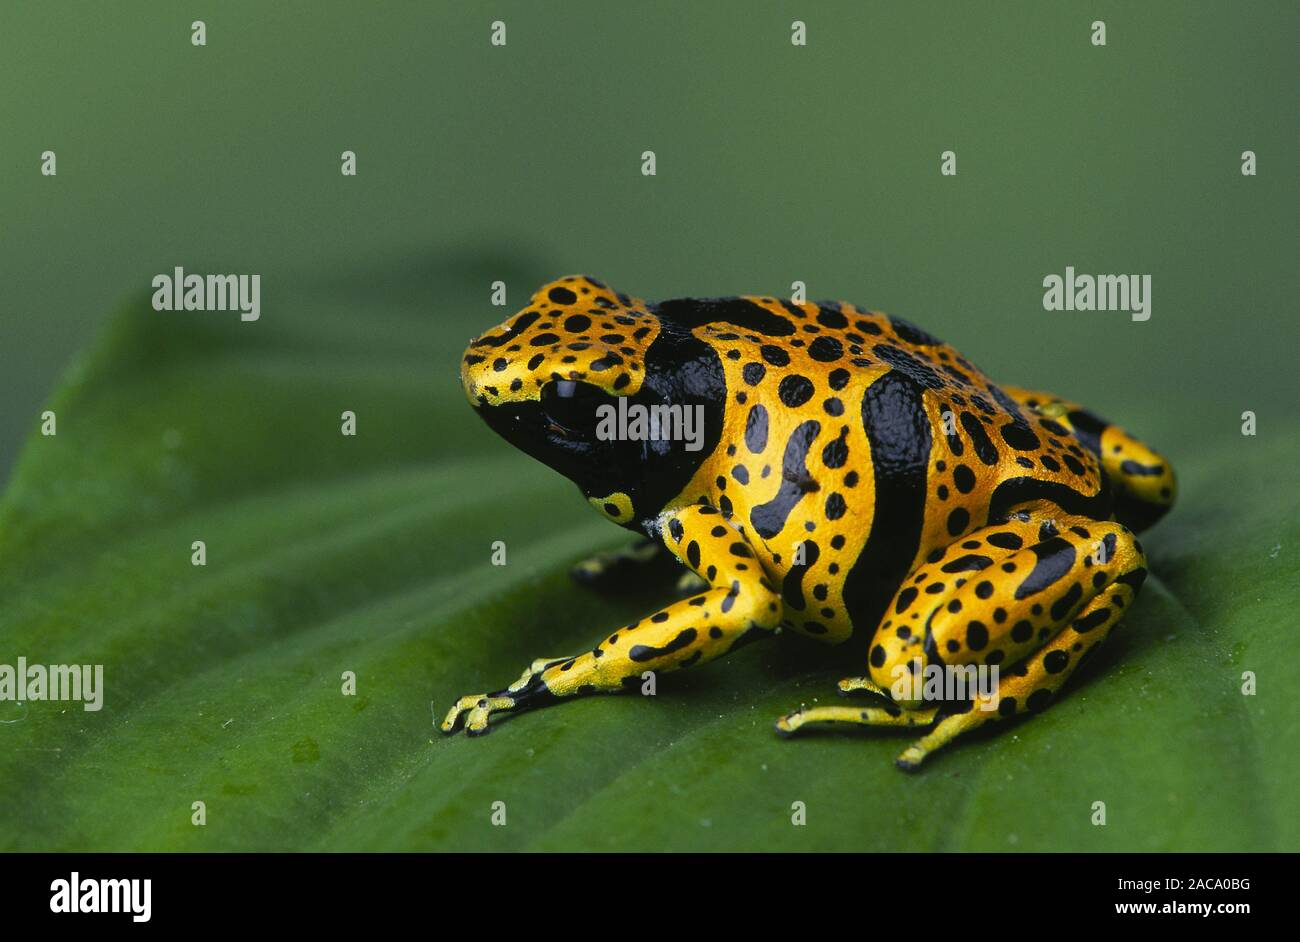 Yellow-banded Poison Arrow Frog Stock Photo